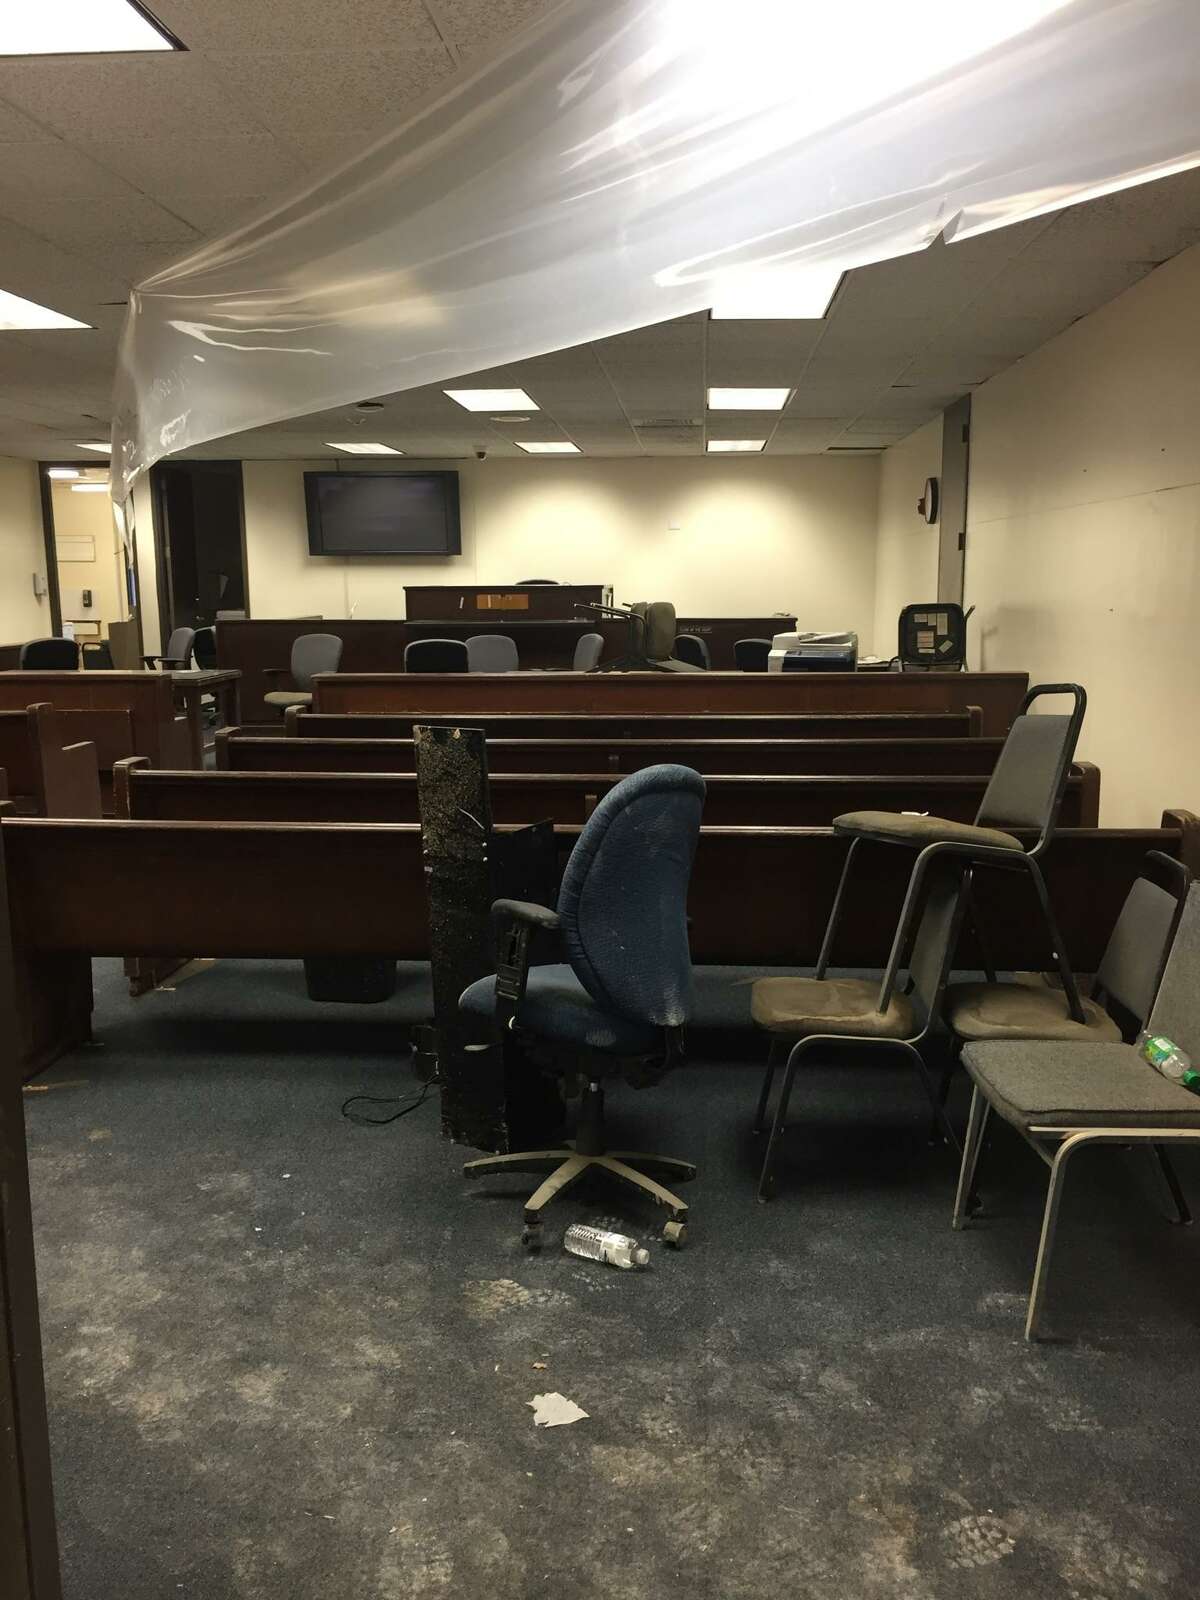 The Harris County Justice of the Peace Precinct 4, Place 1 courthouse in Spring expects to re-open to the public in earlyÂ 2018 after sufferingÂ flood damageÂ during Hurricane Harvey, said Judge Lincoln Goodwin. The courthouse will replace drywall, carpet, tile and more before the staff can return.